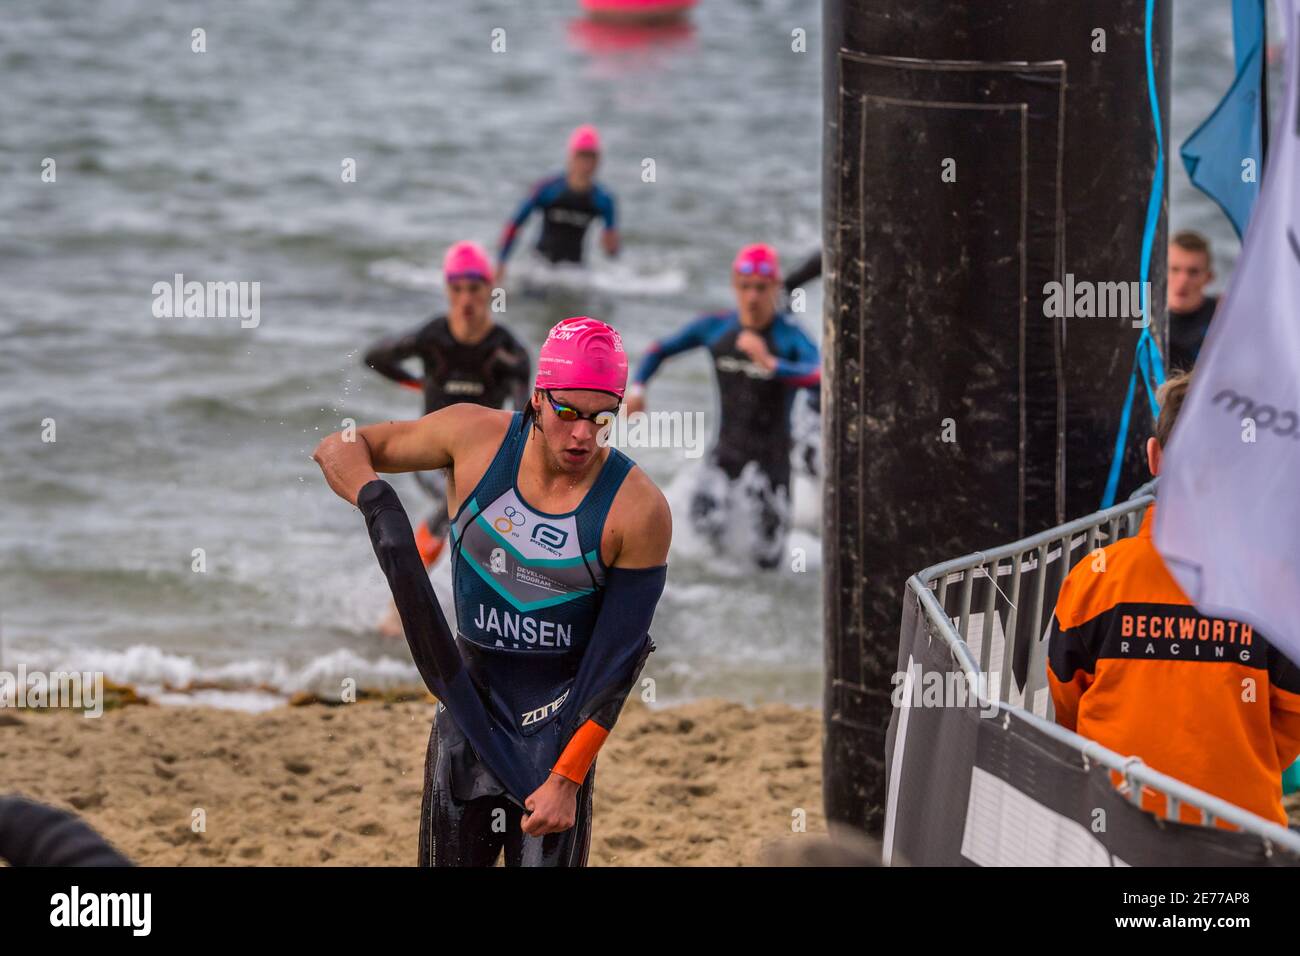 Melbourne, Australia. 17th Jan, 2021. Tomm Jansen - Junior Elite removing the wet suit on a run during the 2XU Triathlon Series 2021, Race 1 at St Kilda Beach. Credit: SOPA Images Limited/Alamy Live News Stock Photo